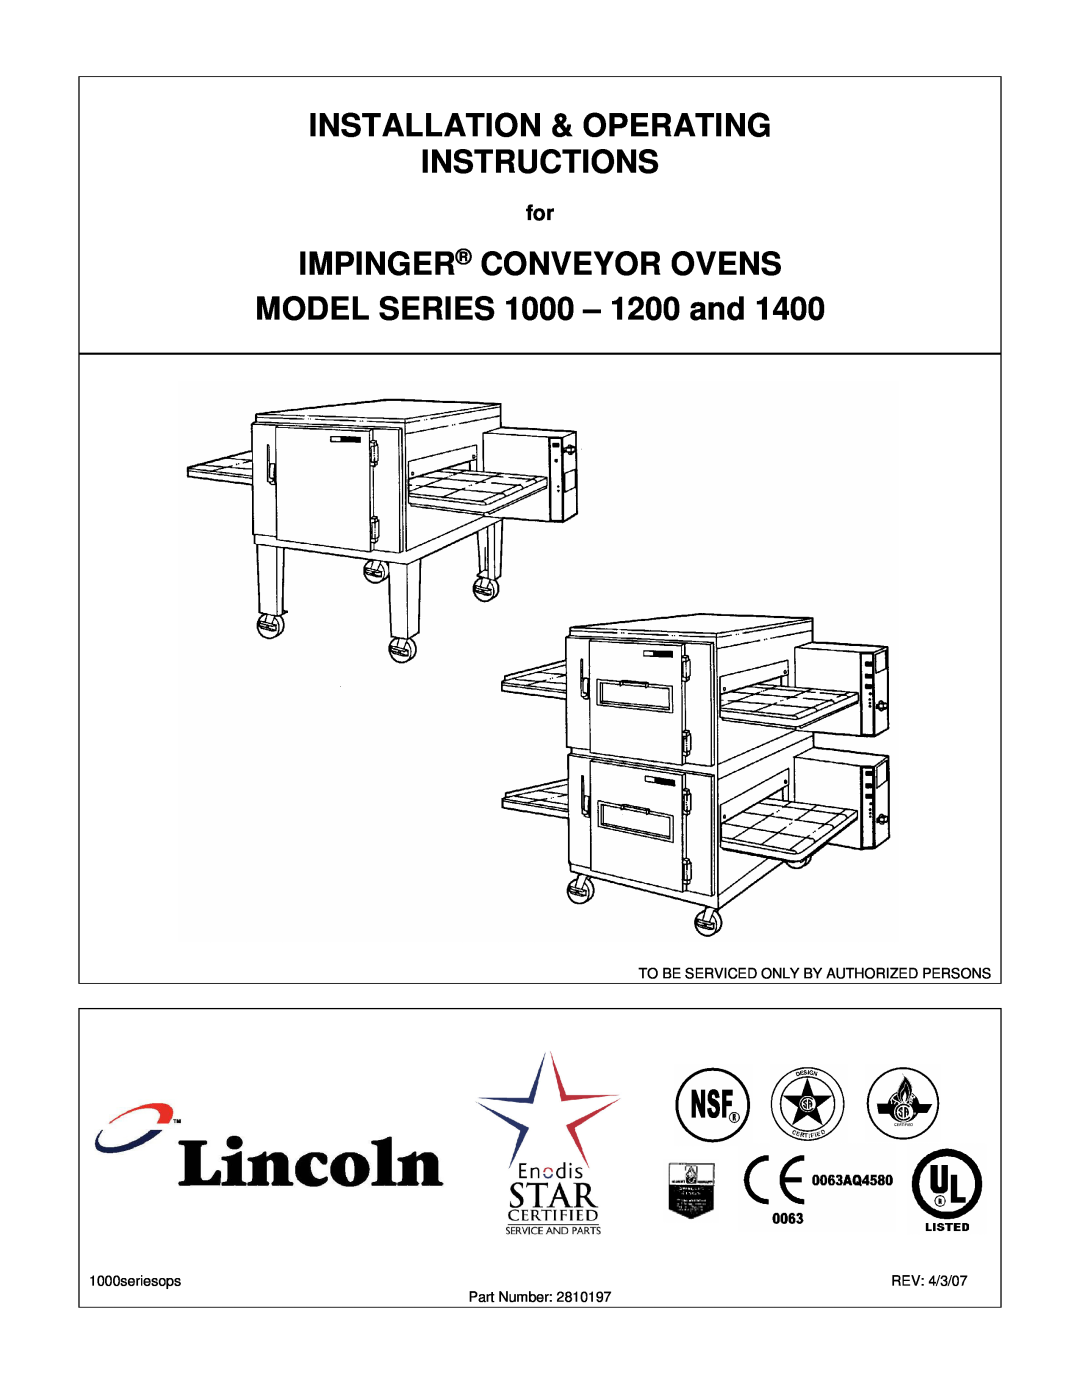 Lincoln 1200, 1400 service manual Lincoln Foodservice Products, LLC, North Hadley Road Fort Wayne, Indiana, Service Manual 